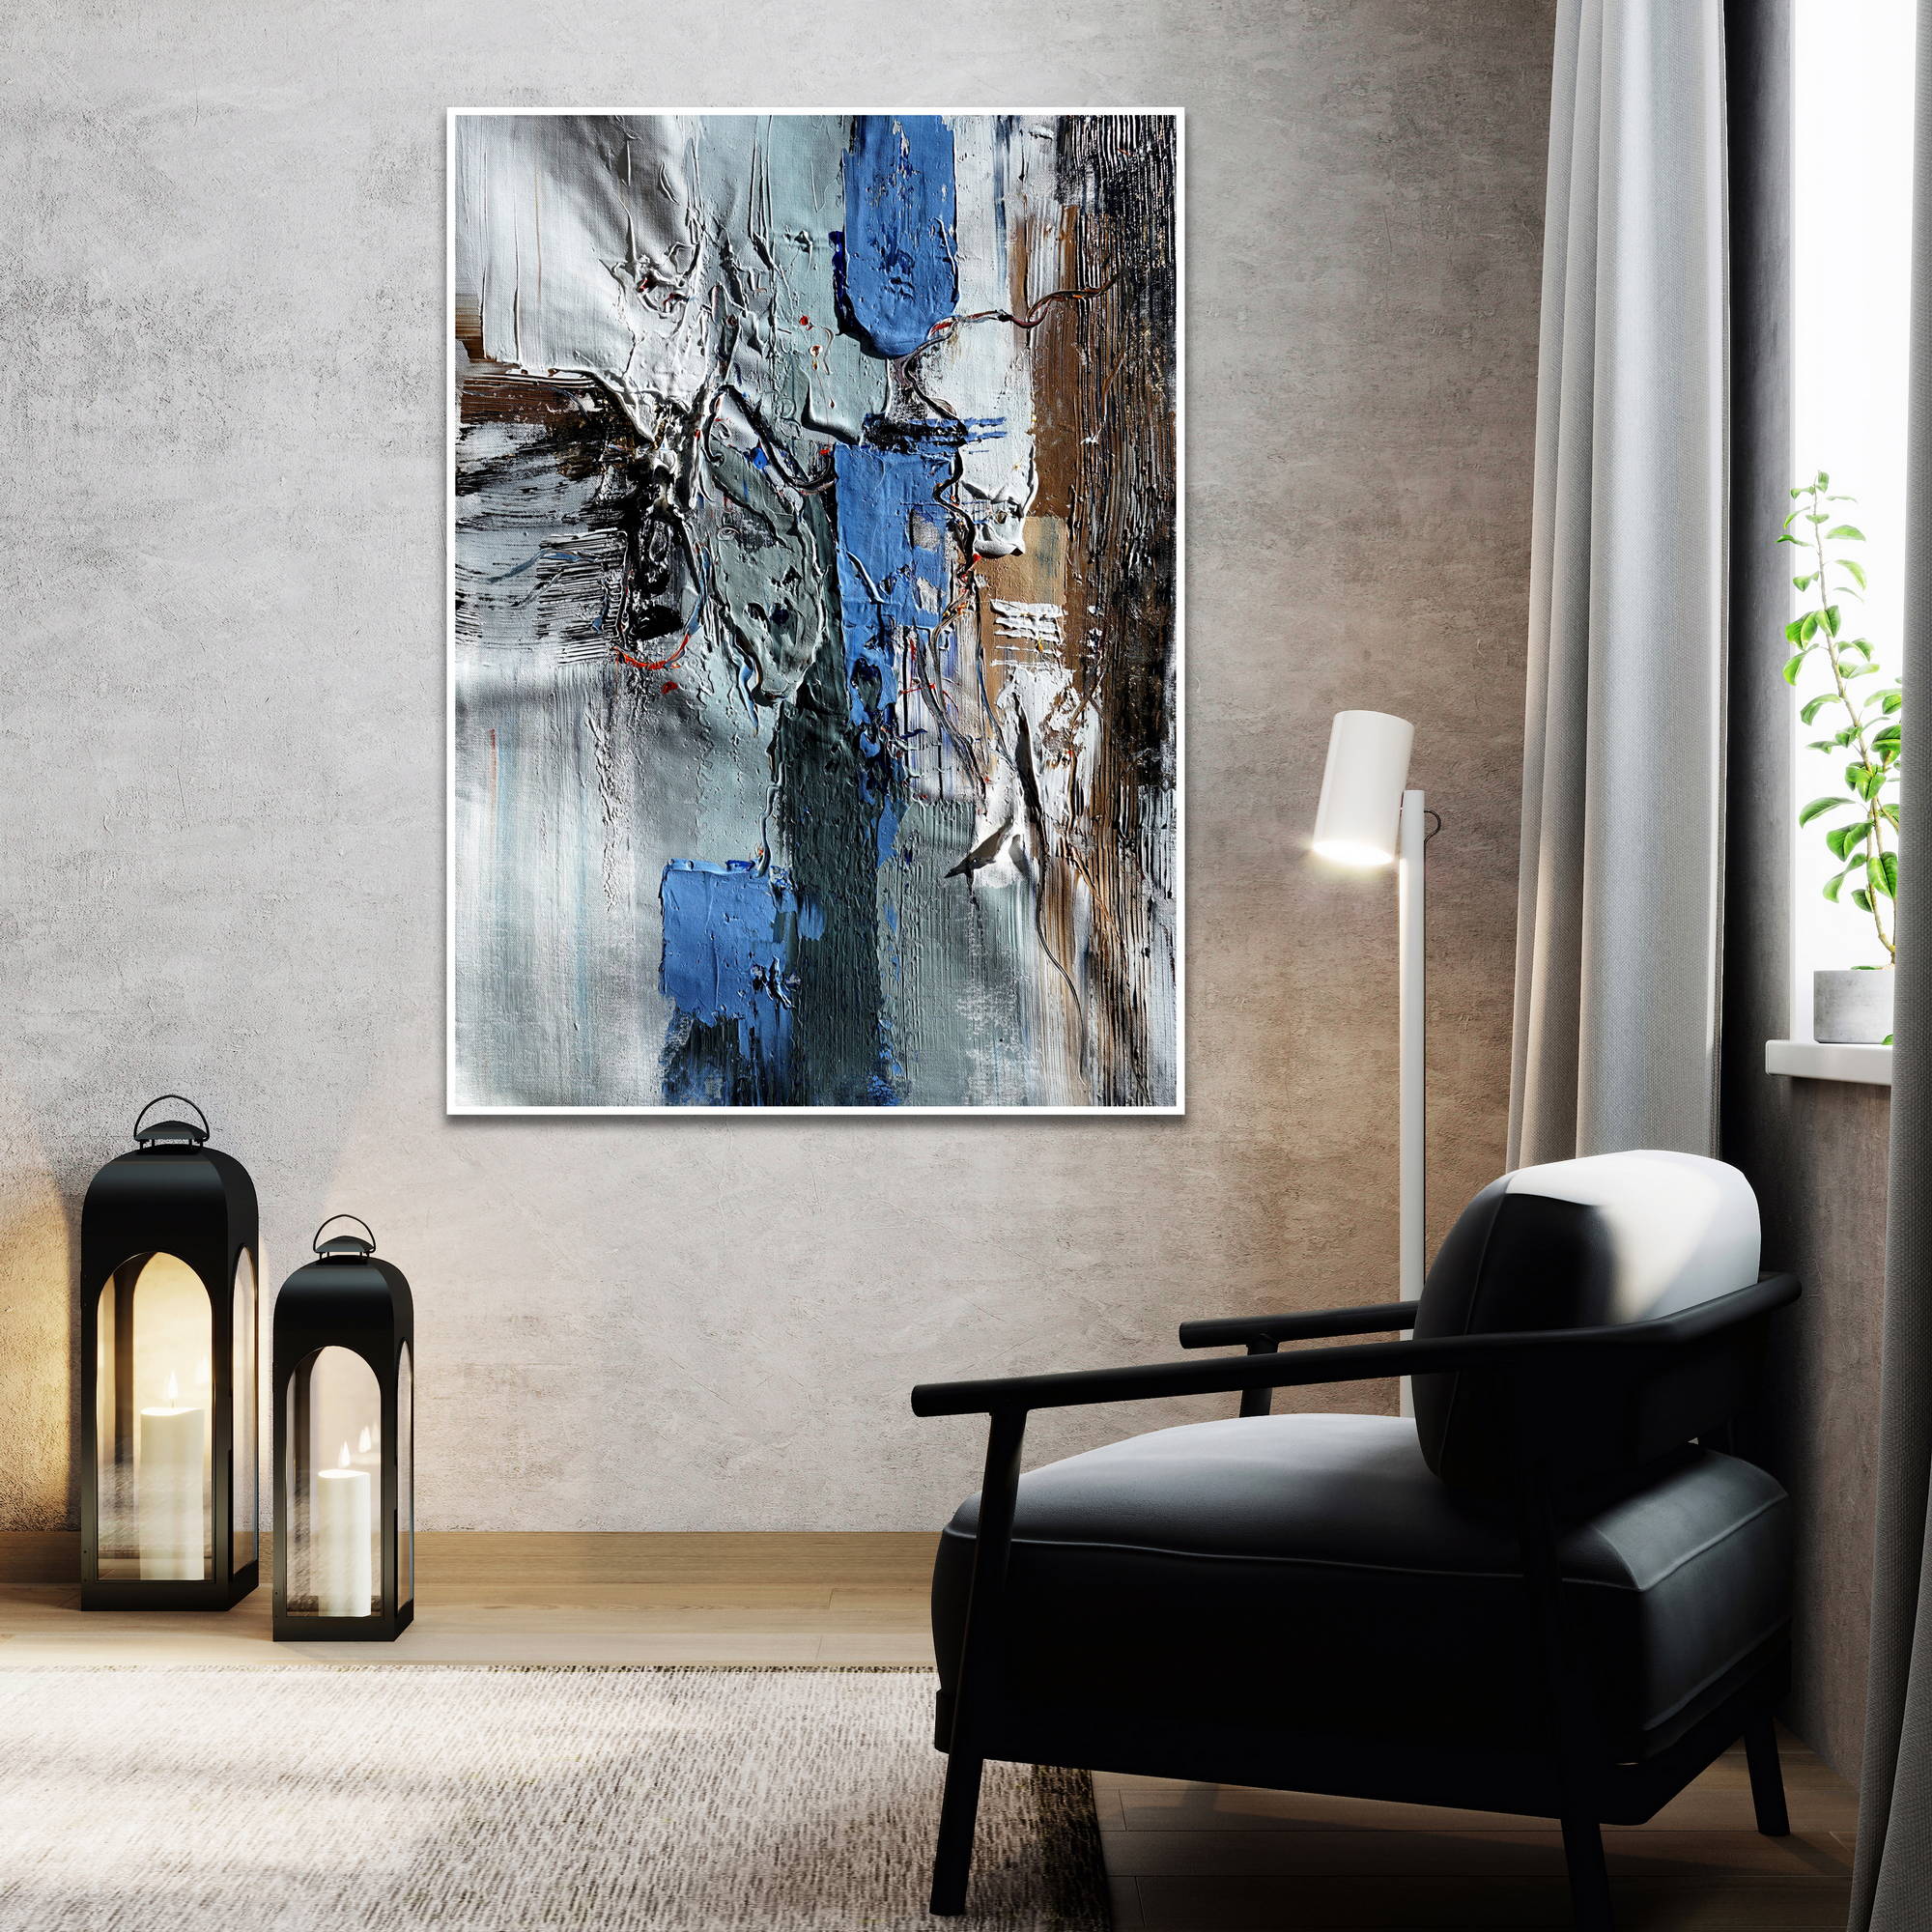 Hand painted Abstract in Blue and Gray 80x120cm